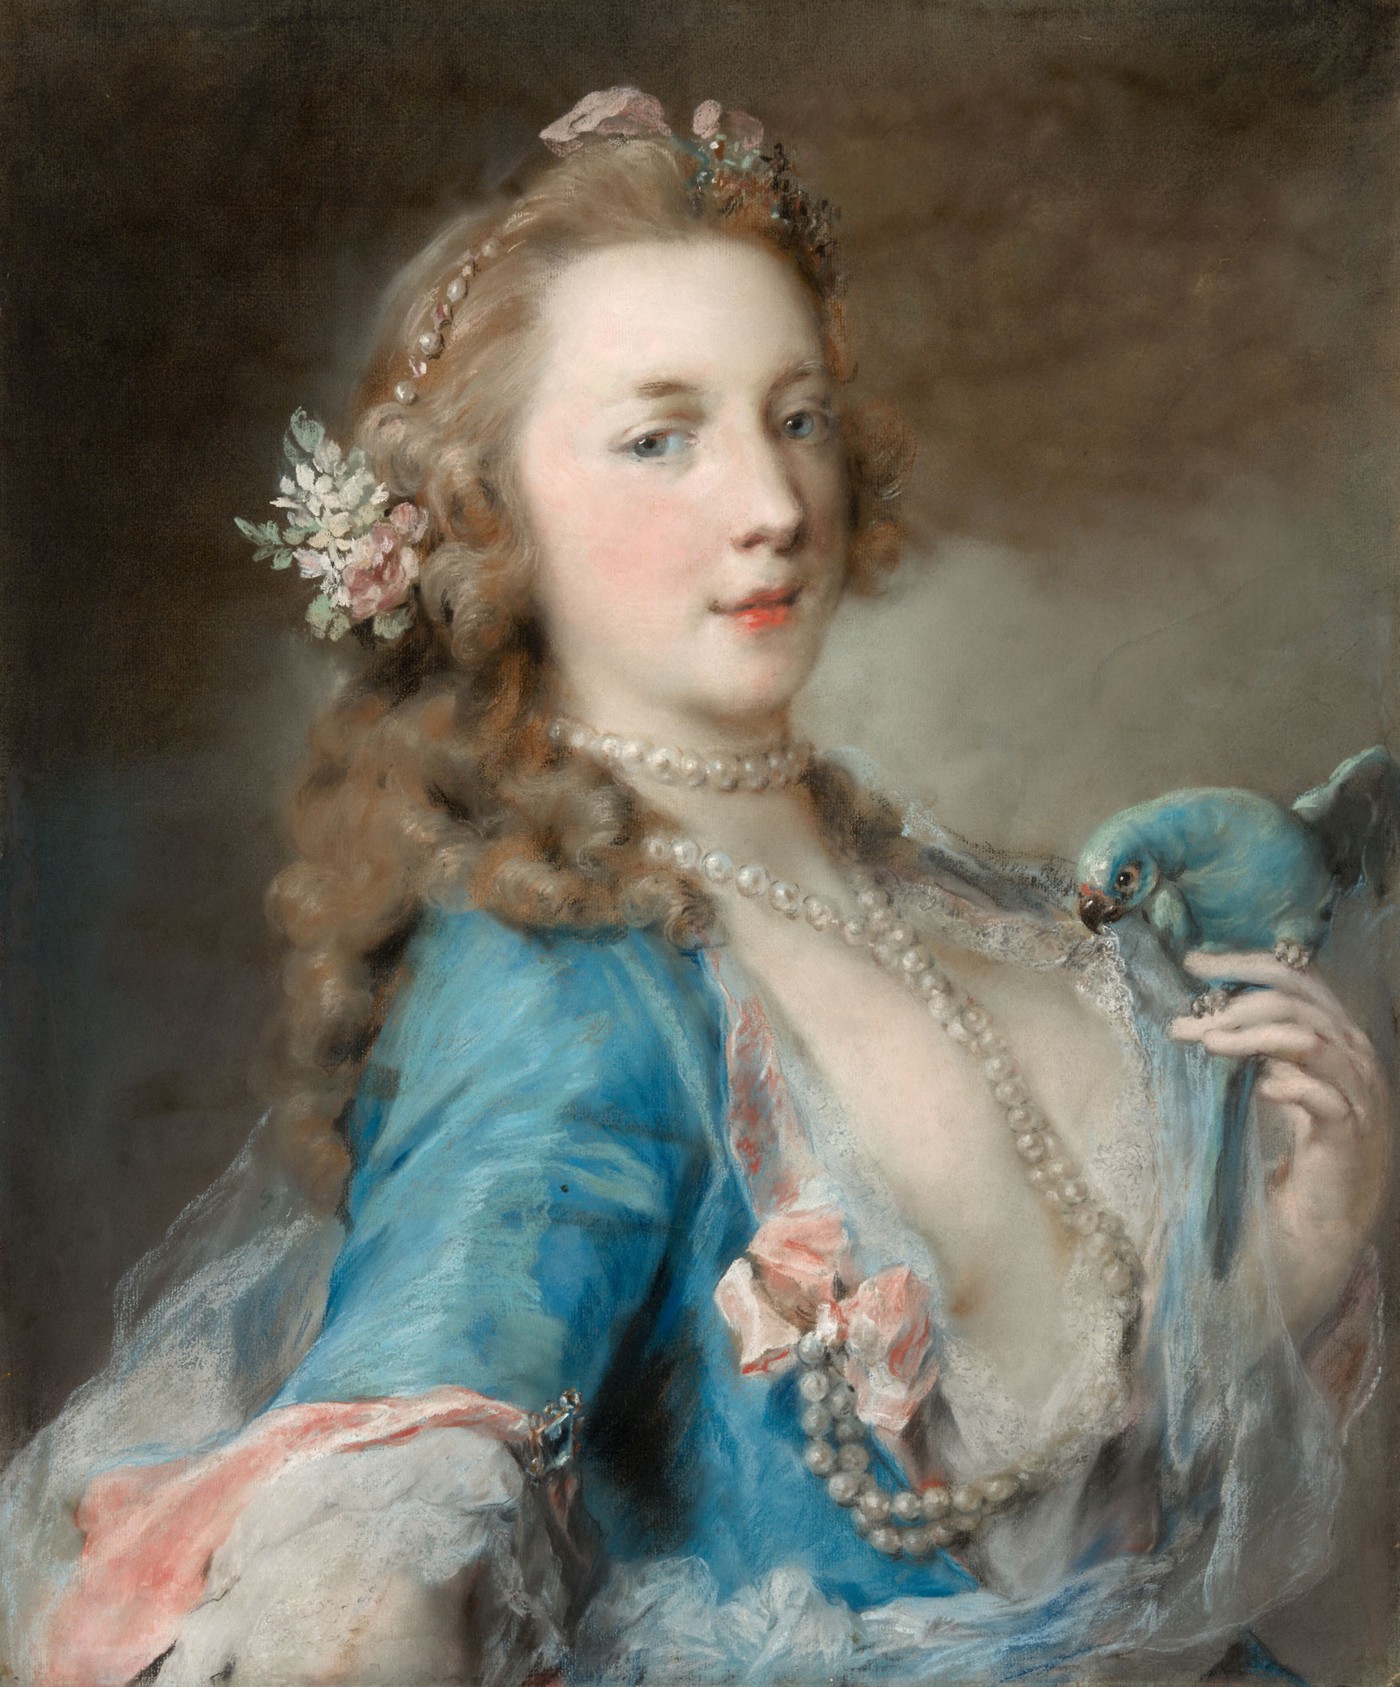 Rosalba Carriera, A Young Lady with a Parrot (circa 1730). Collection of the Art Institute of Chicago